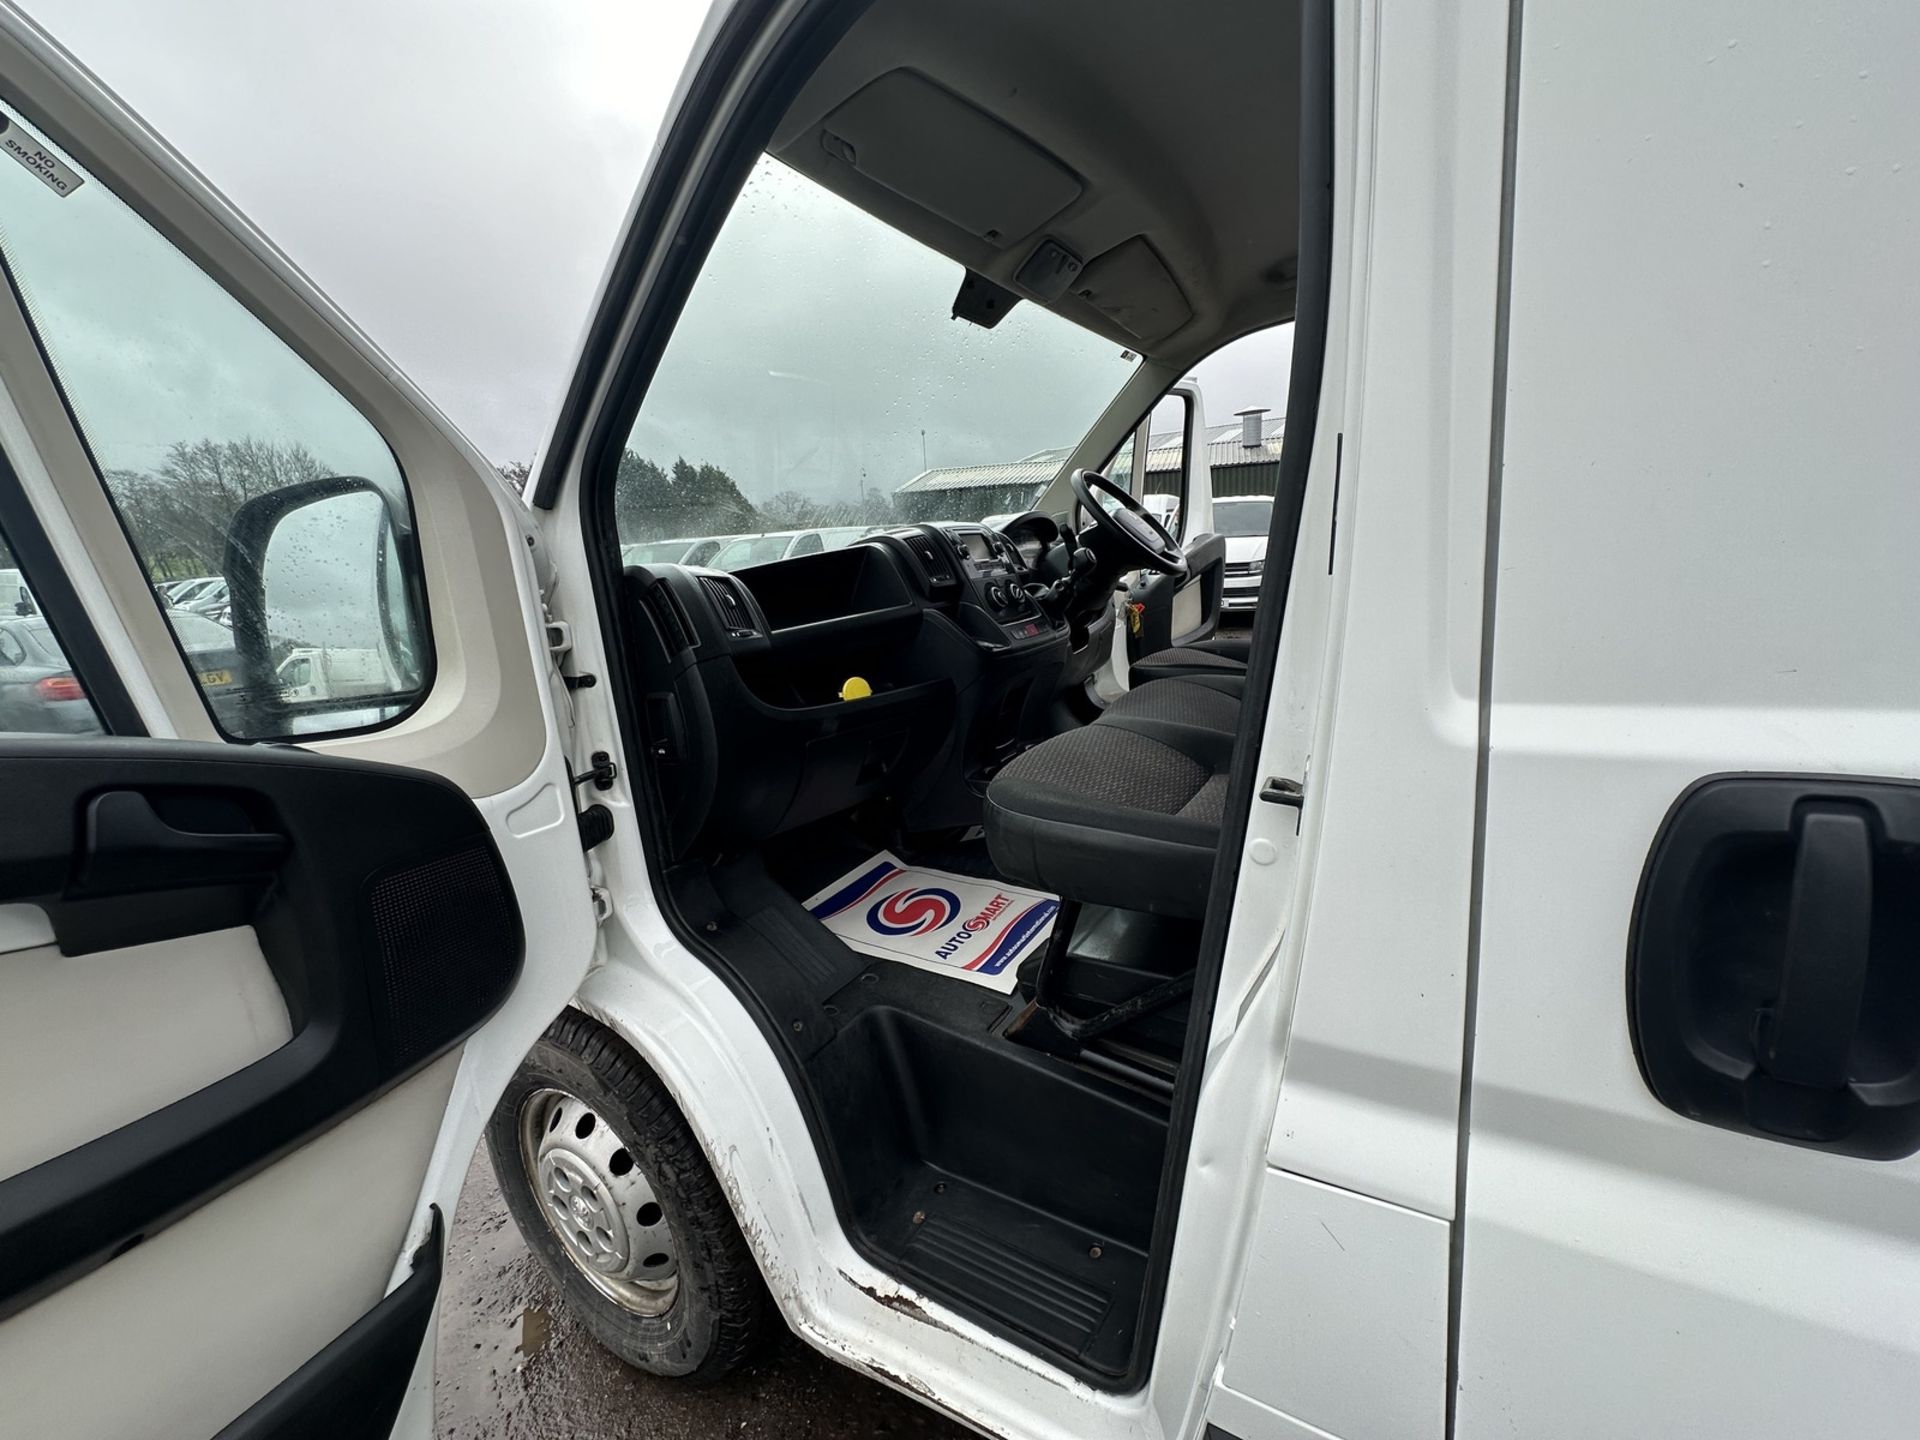 WHITE WORKHORSE: 2019 PANEL VAN, READY FOR DUTY - Image 4 of 18